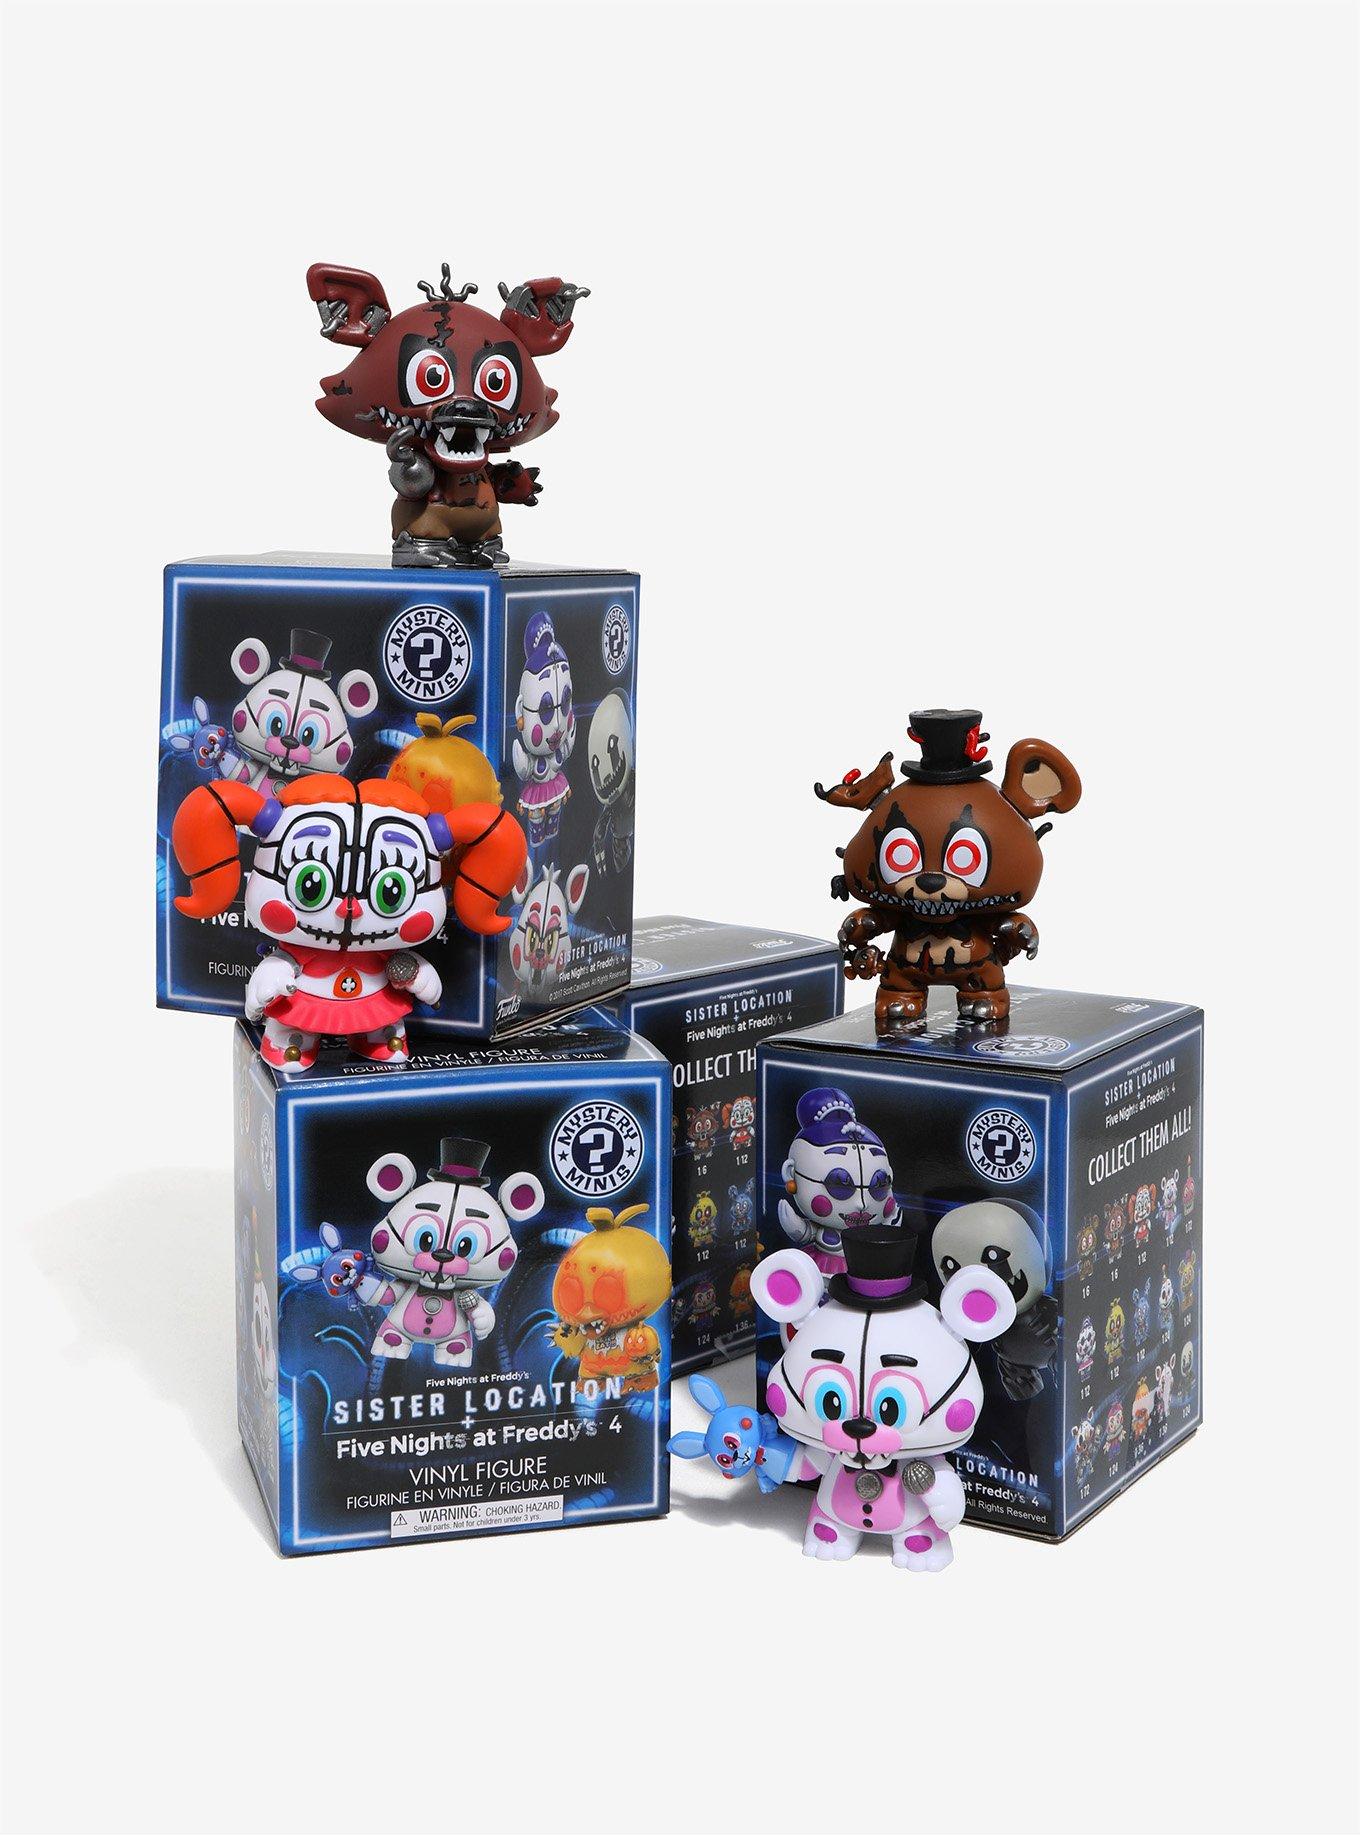  Funko Bitty Pop!: Five Nights at Freddy's Mini Collectible Toys  4-Pack - Foxy, Cupcake, Chica & Mystery Chase Figure (Styles May Vary) :  Toys & Games